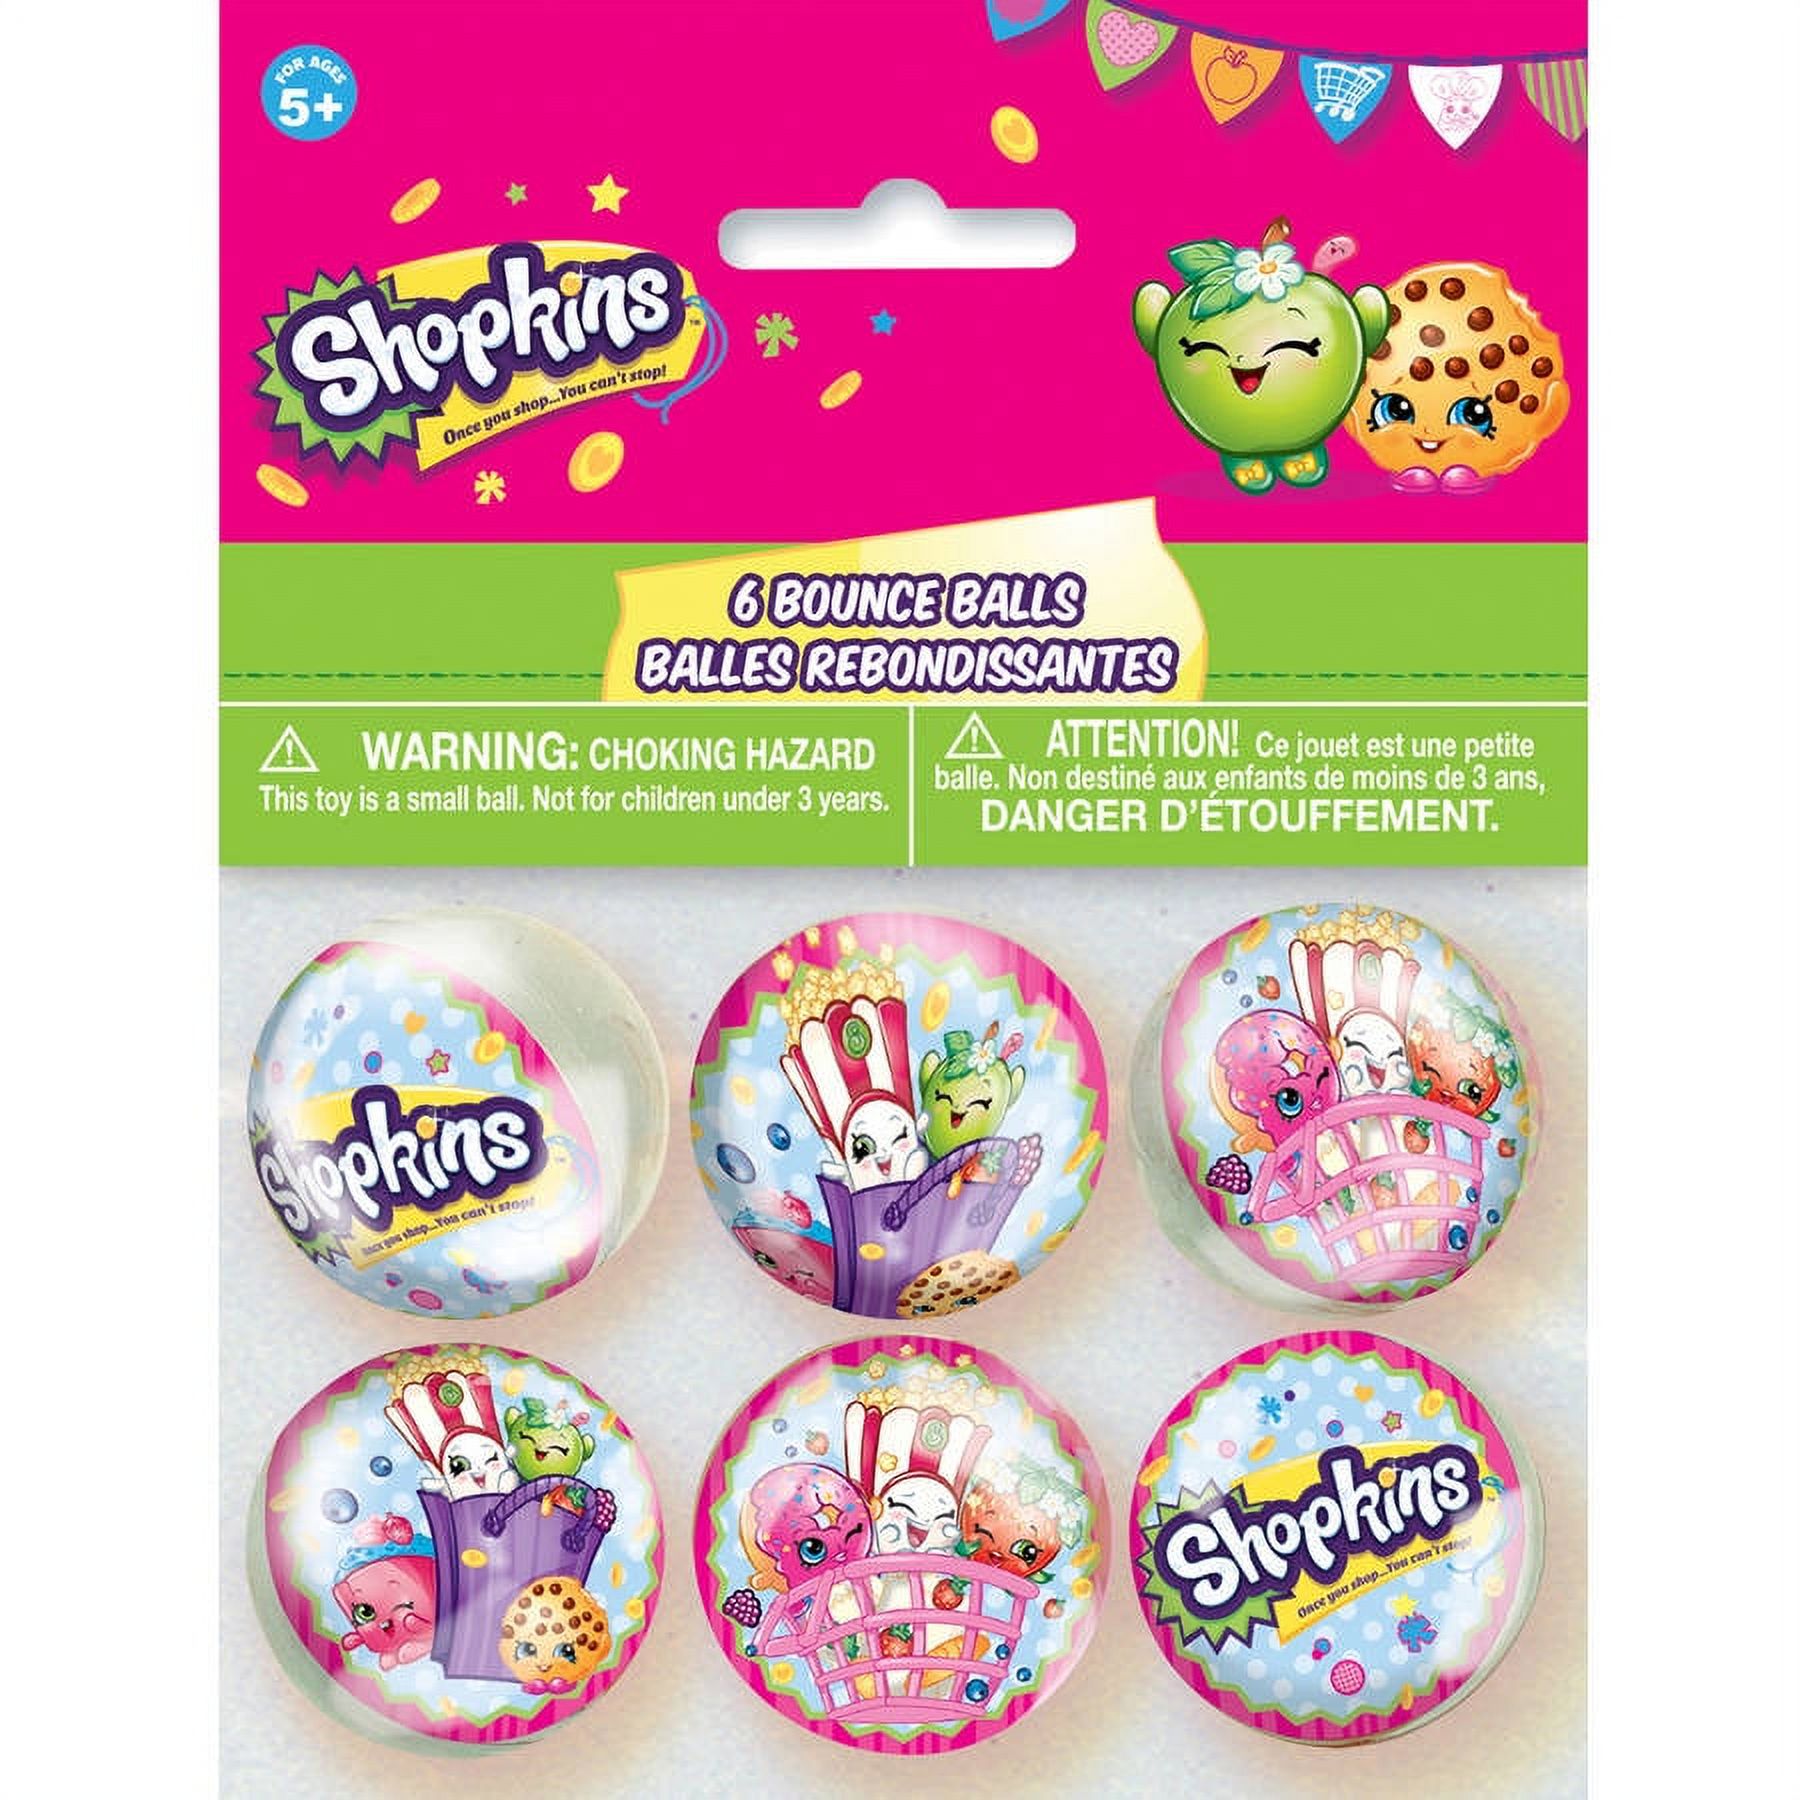 Unique Industries Assorted Colors Birthday Party Favors, 6 Count - image 1 of 2